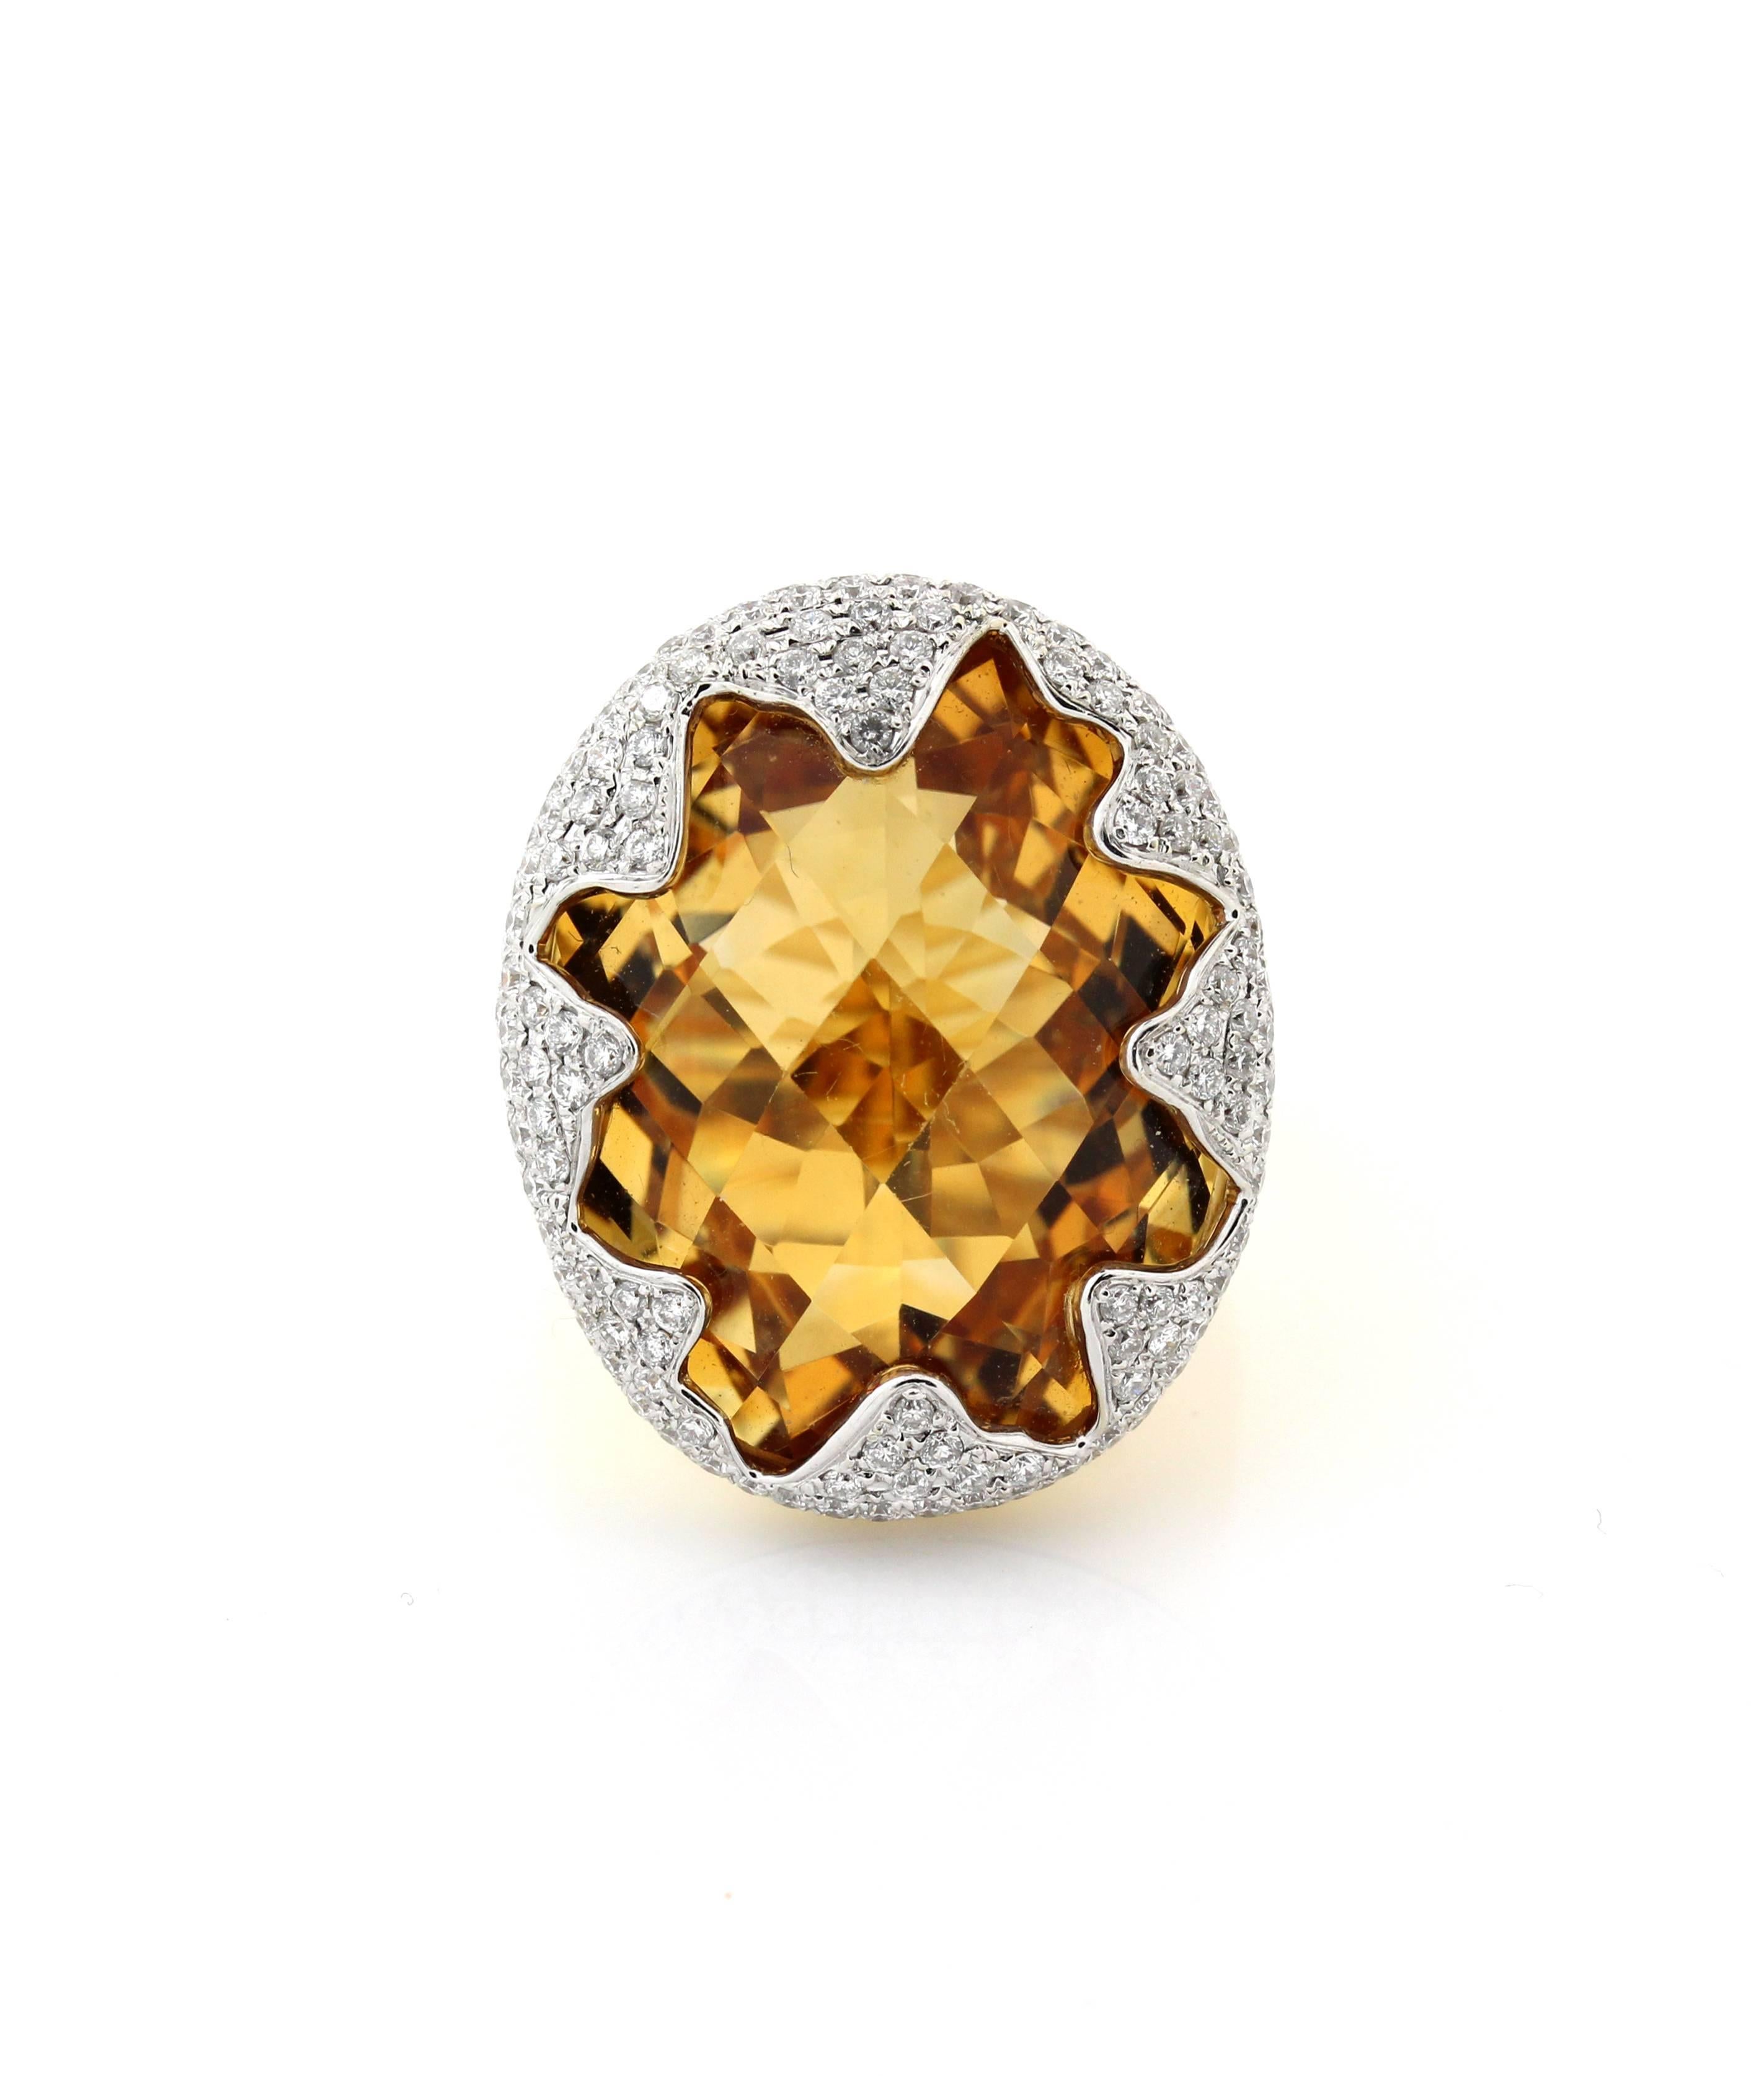 18K Yellow and White Gold Ring with Imperial Citrine Center and Diamonds

Center Citrine is gorgeous in color, has a slight color change aspect. The carat weight is unknown but we are estimating around 20 carat's. The face of the ring is 1.1 inch x